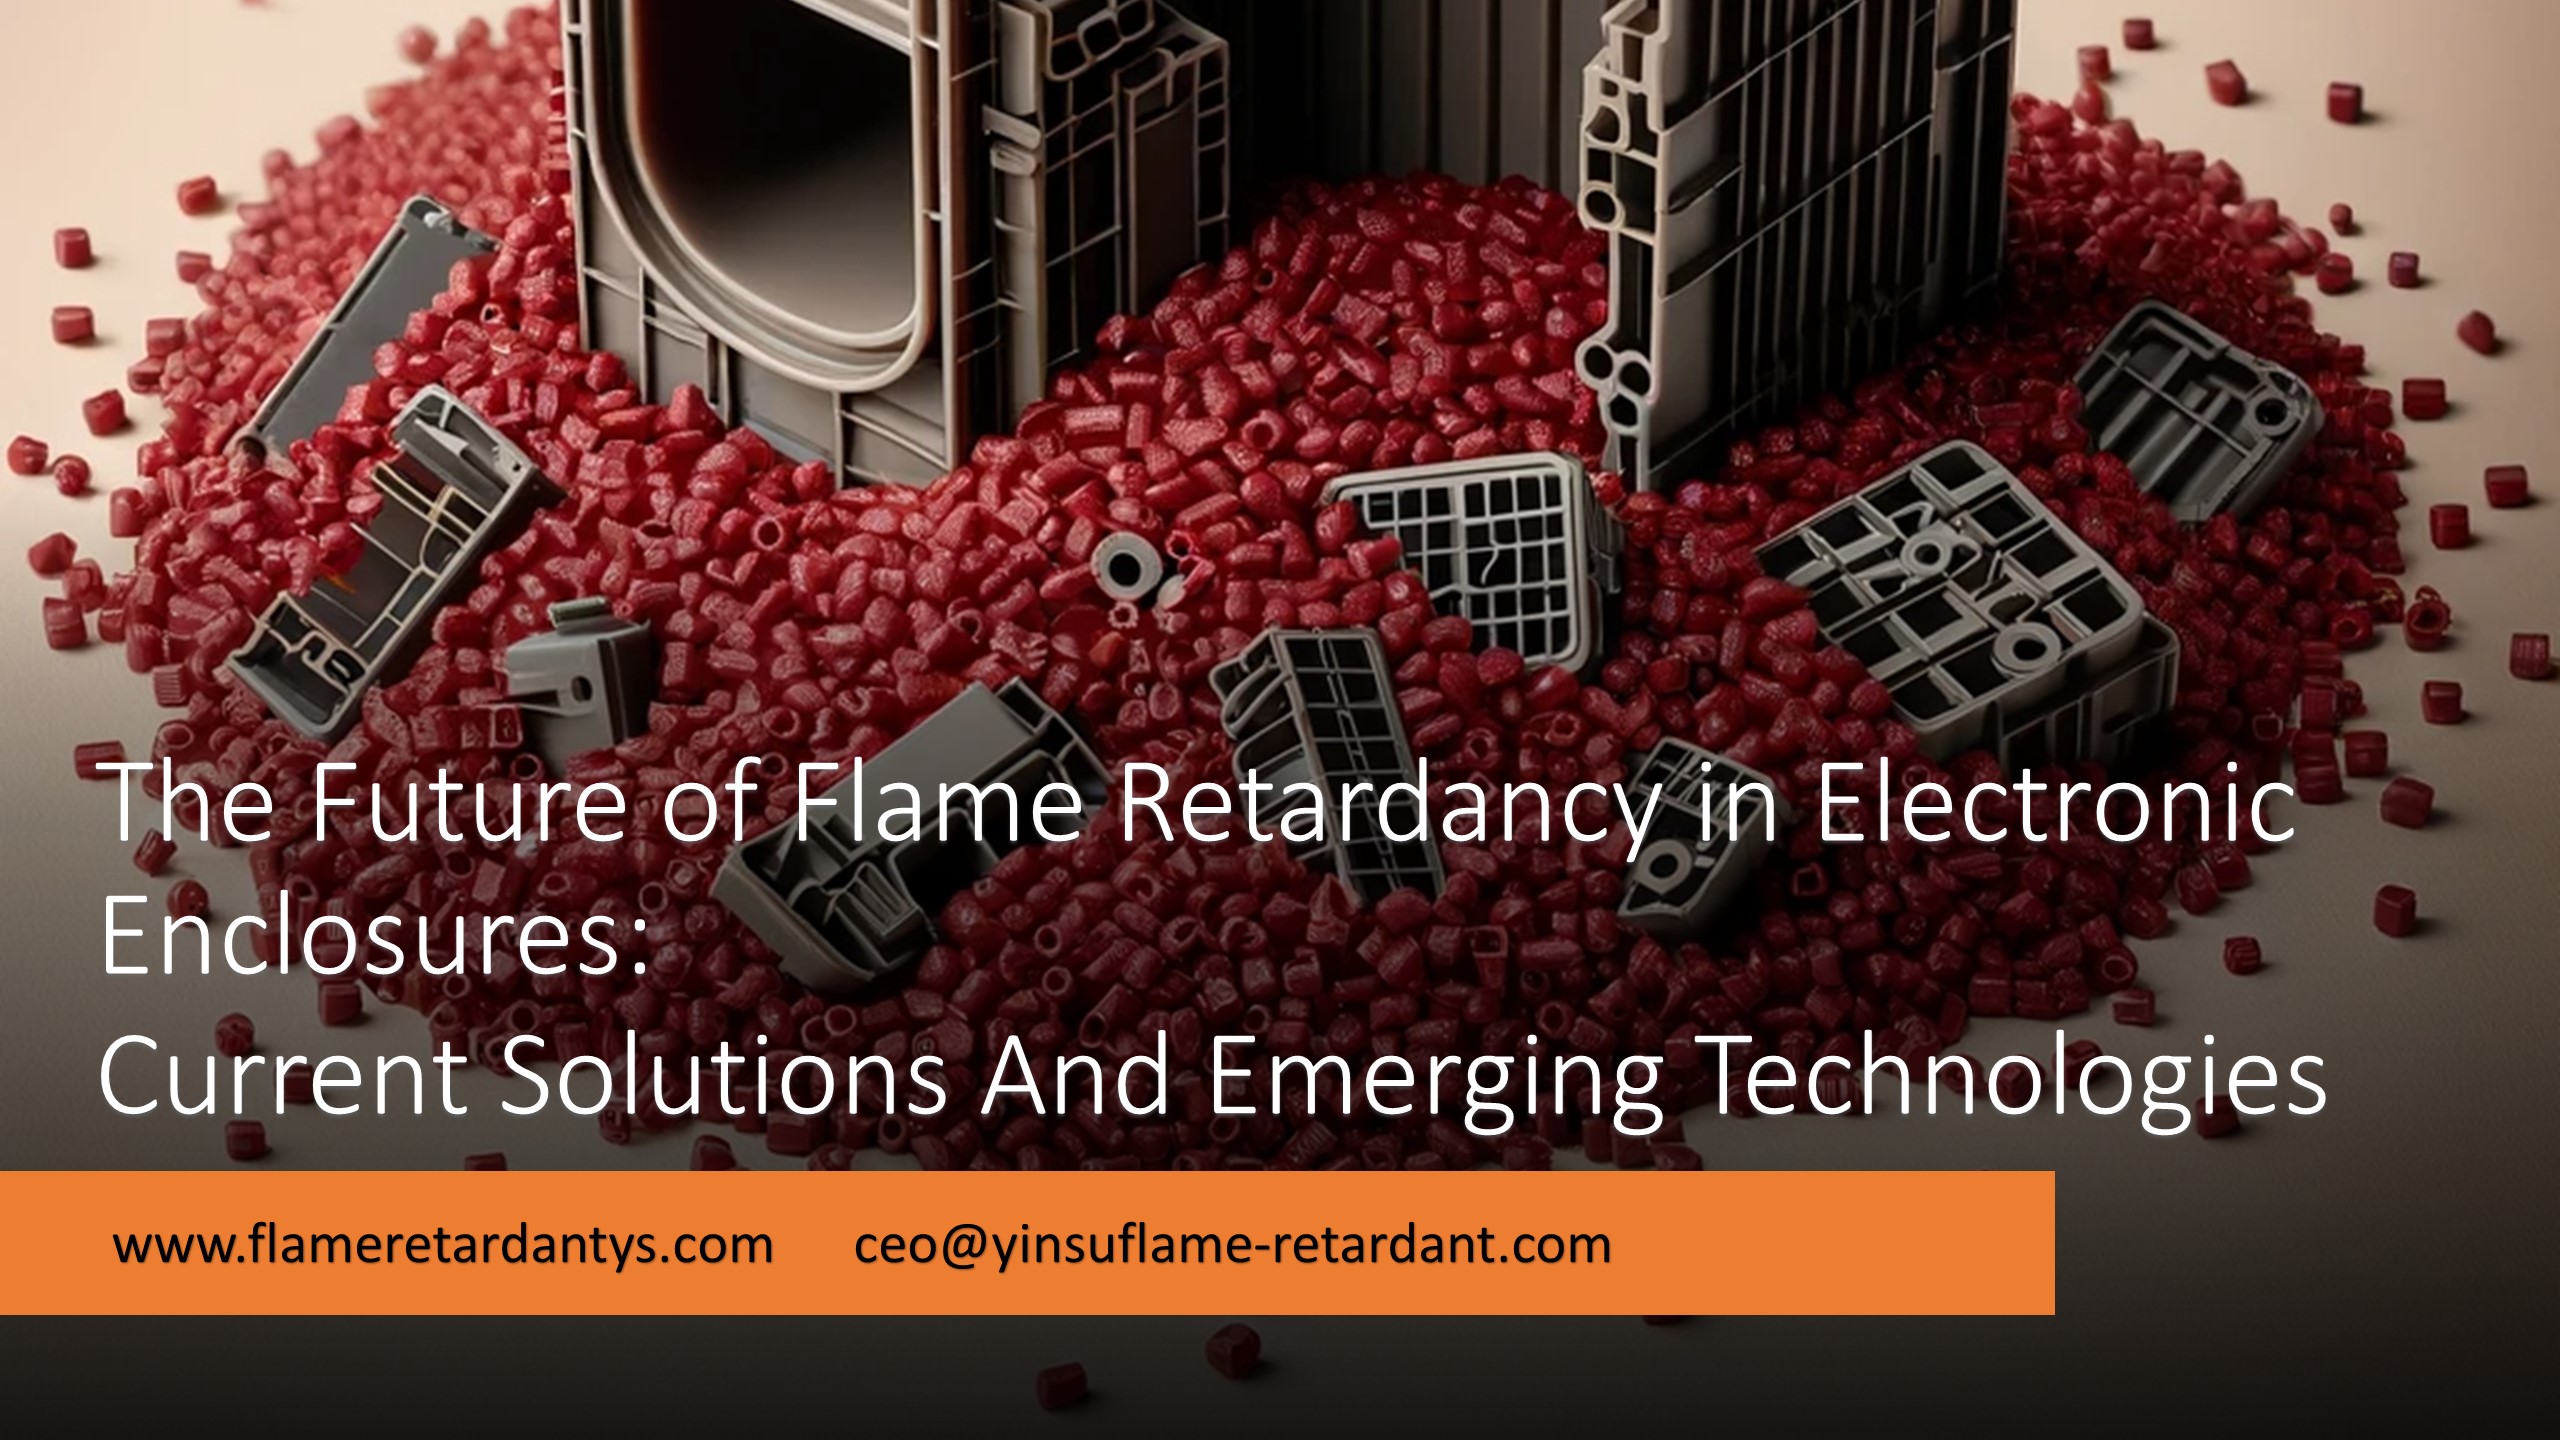 7.2 The Future of Flame Retardancy in Electronic Enclosures